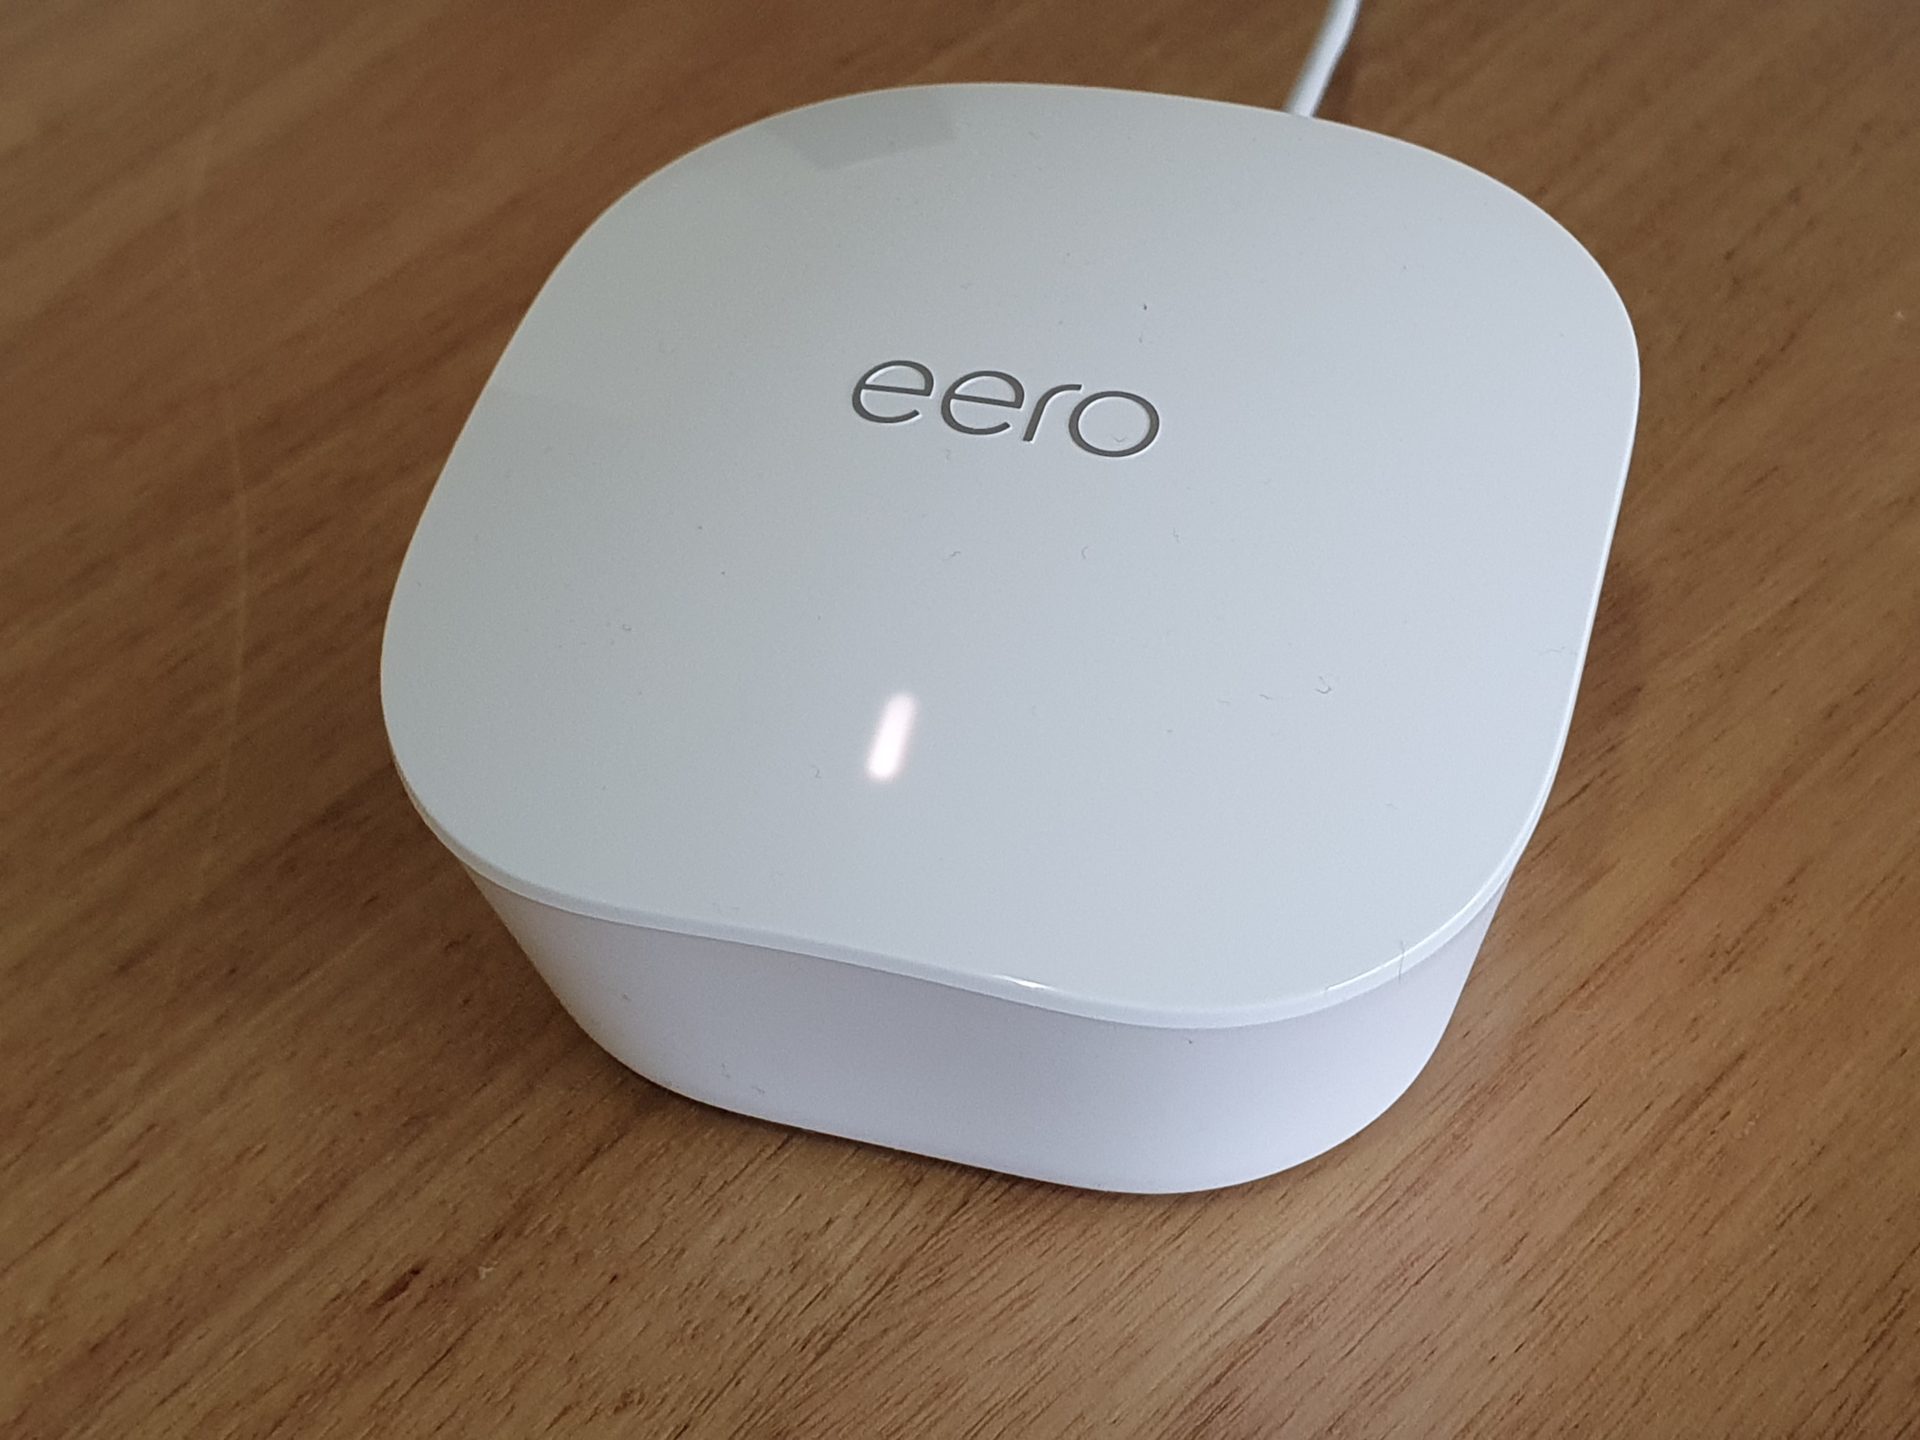 ring eero router inside its new